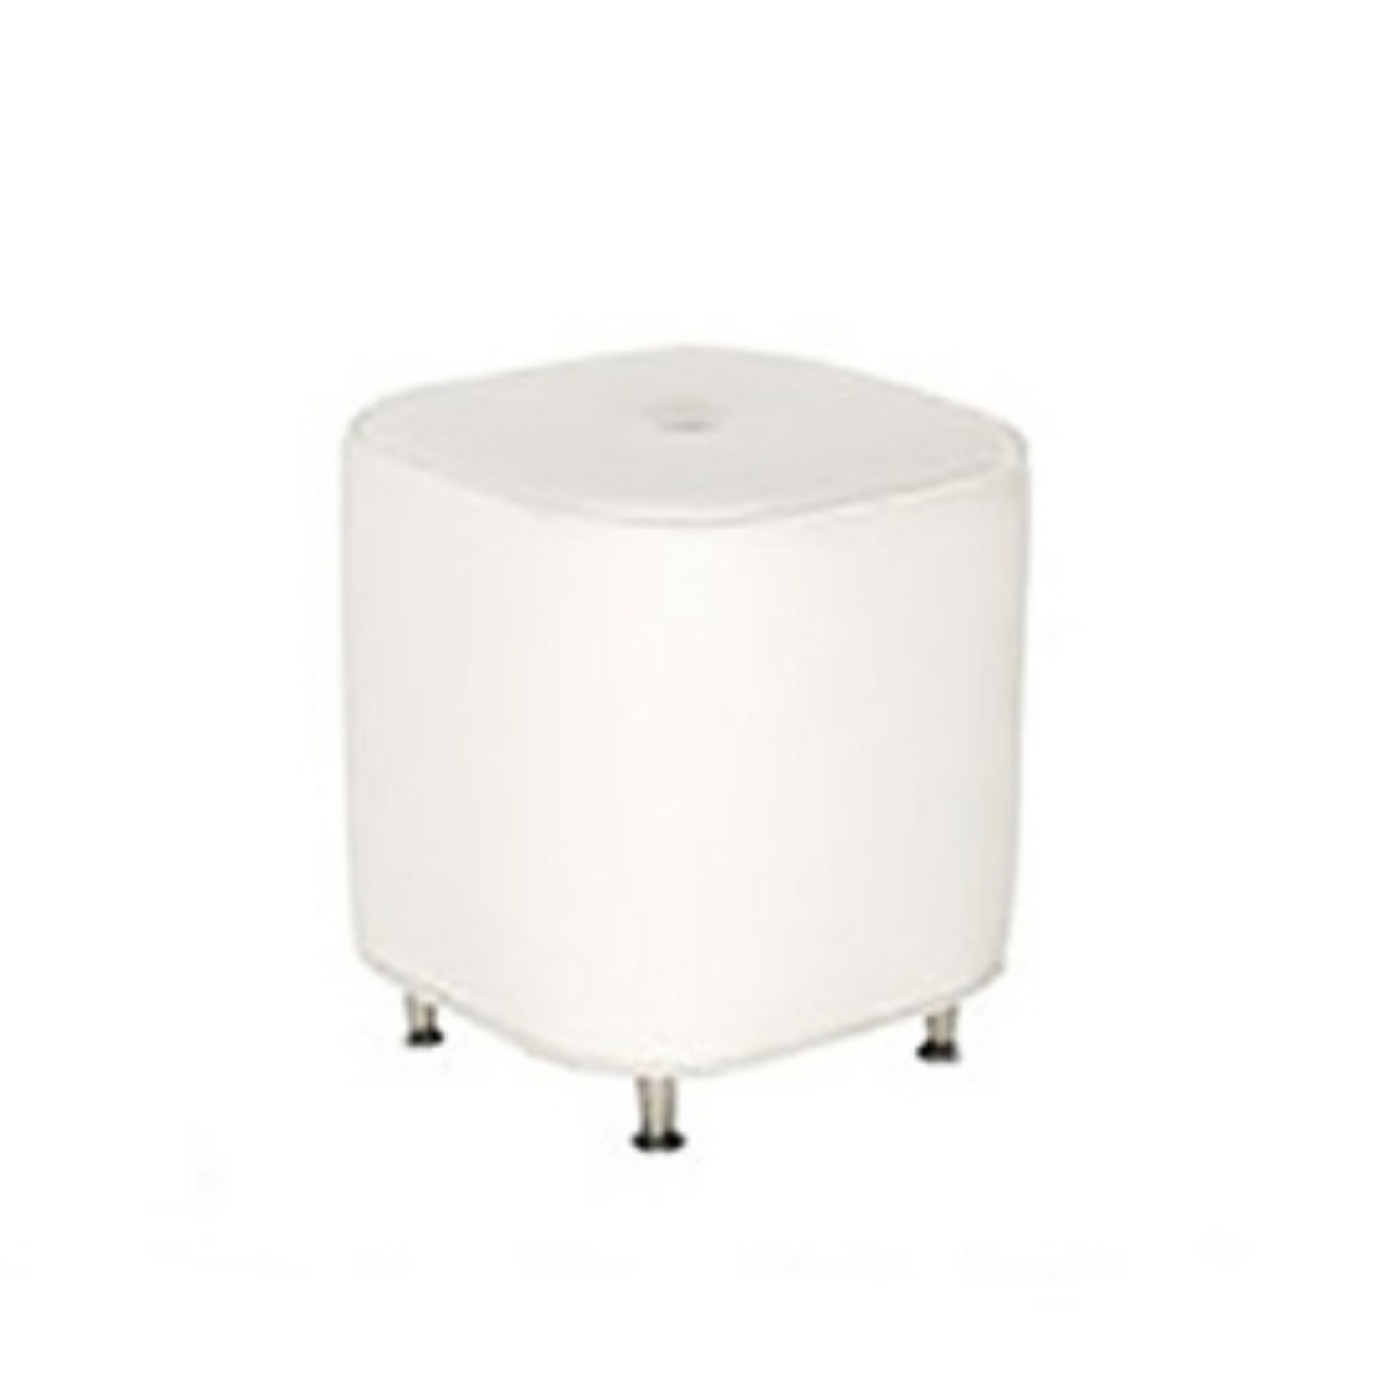 Square White Leather Ottoman With Steel Feet.